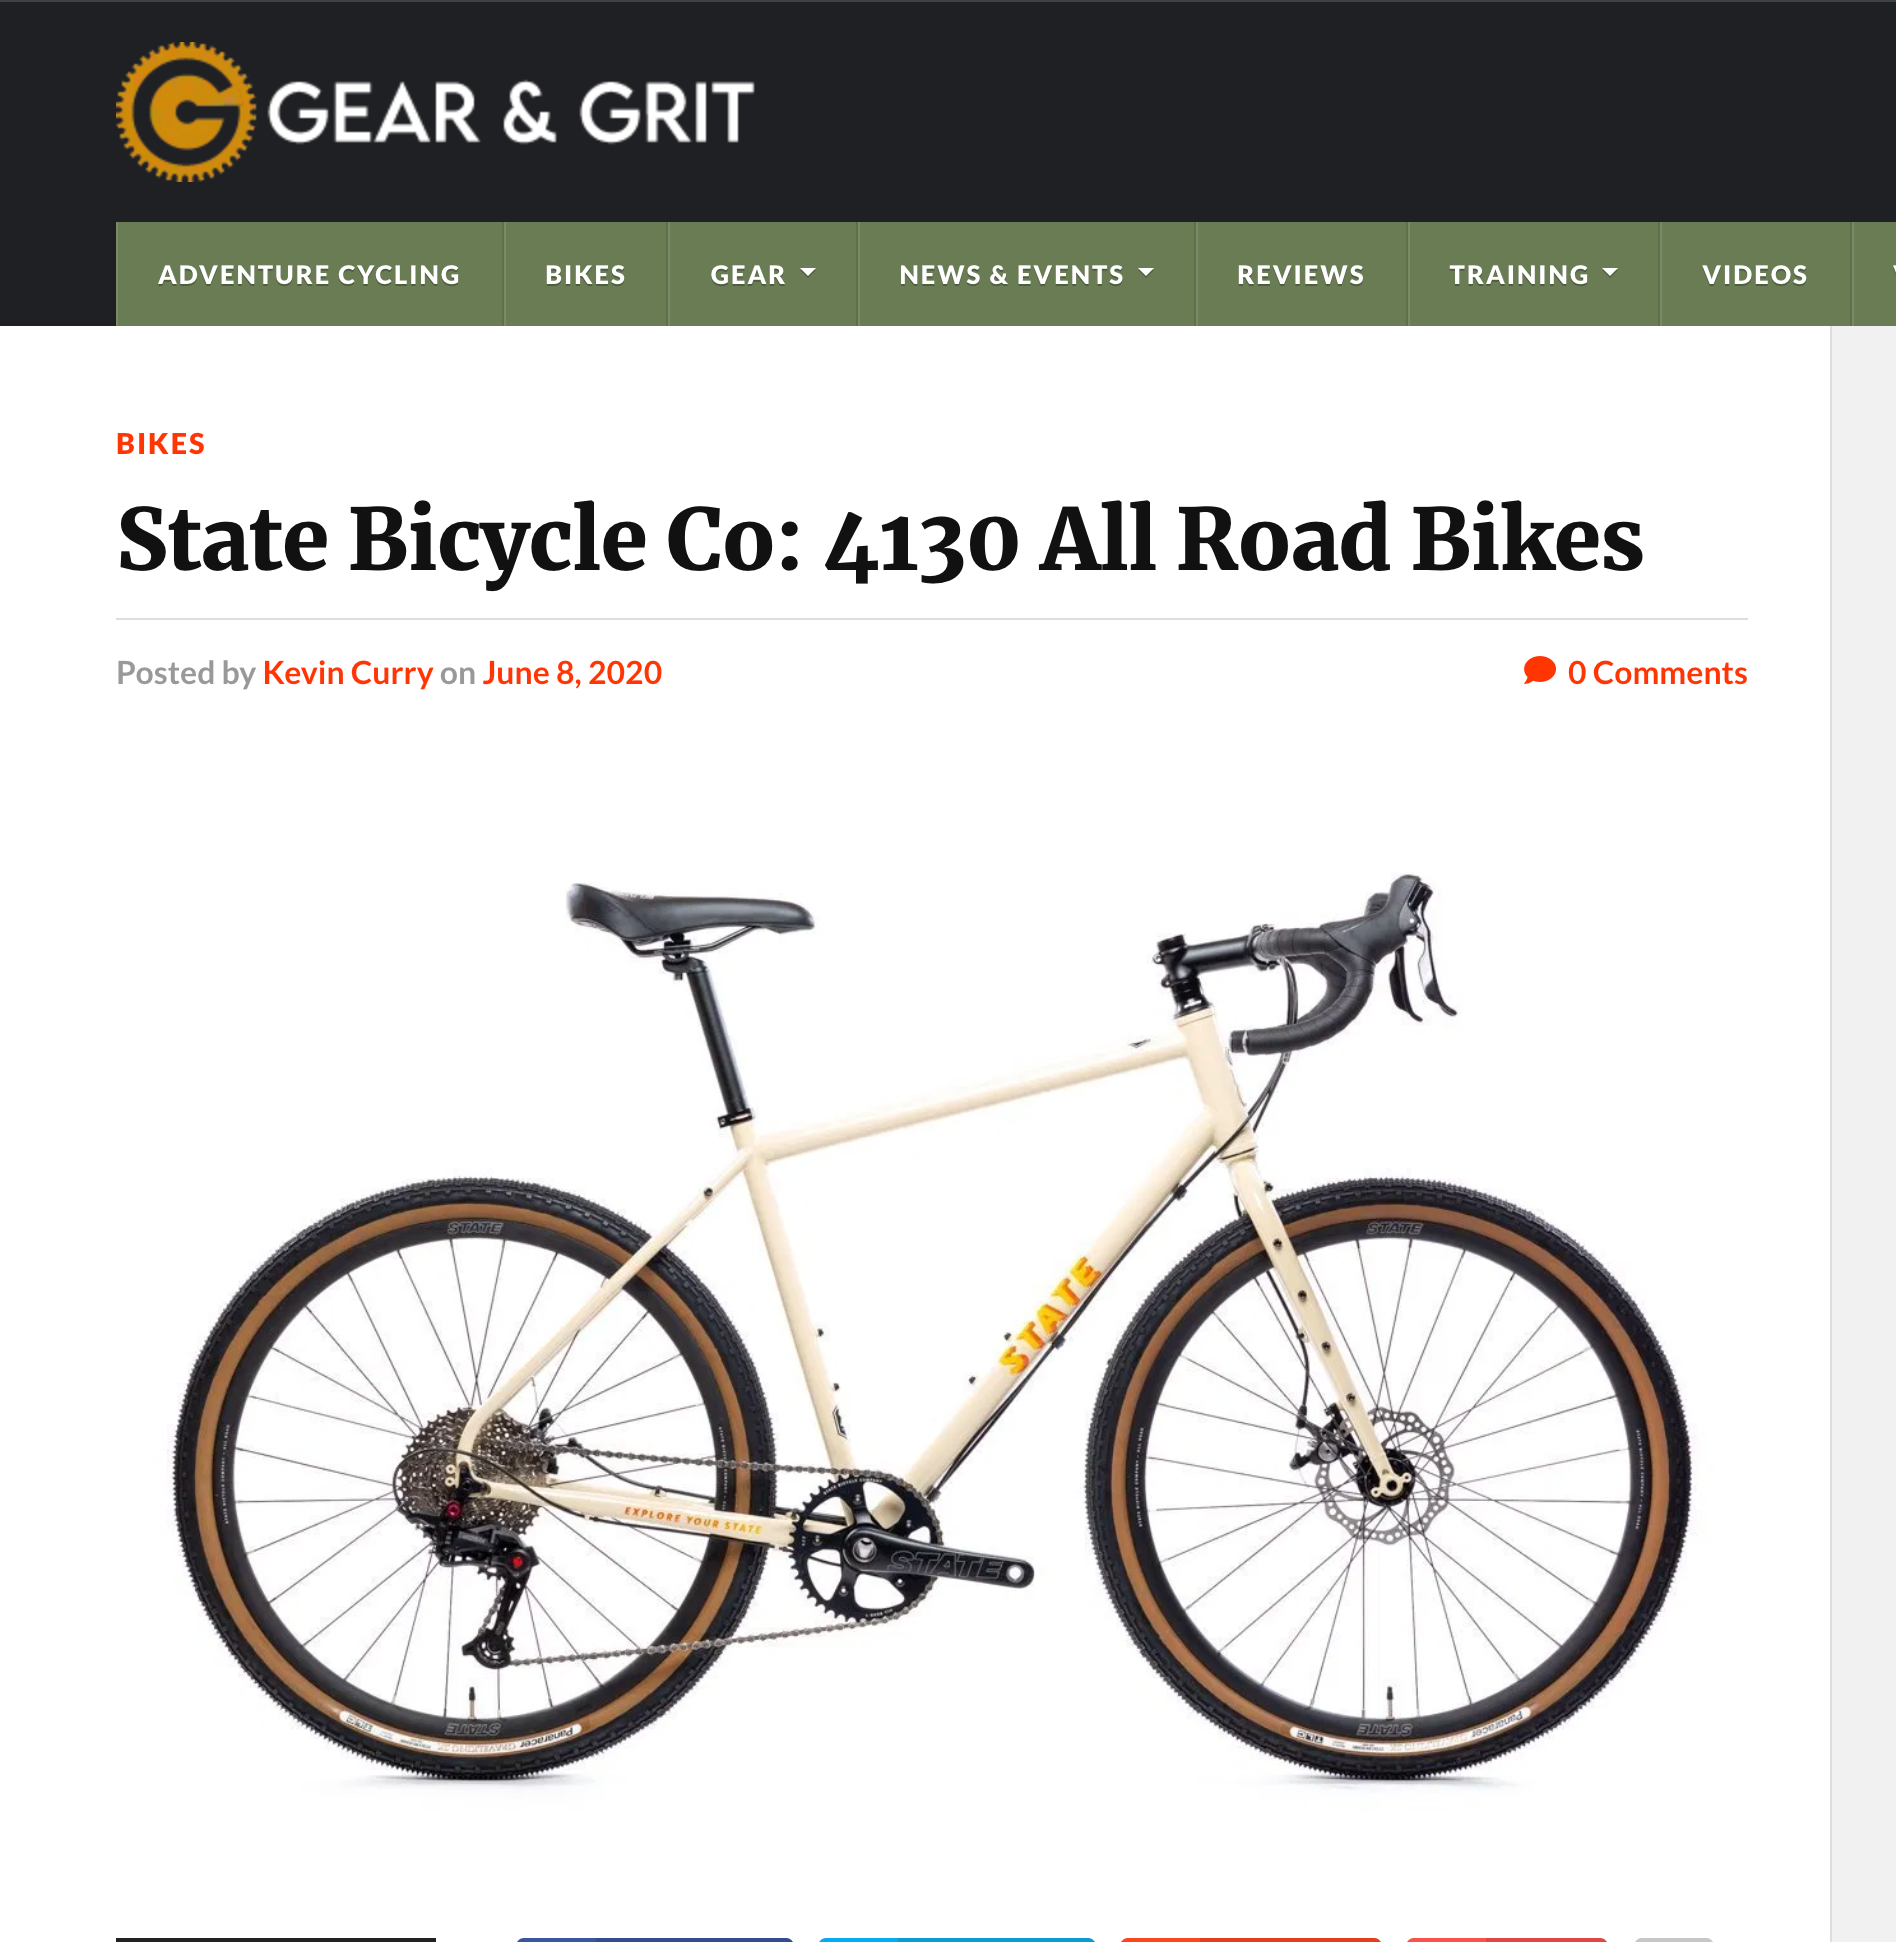 Gear & Grit: State Bicycle Co: 4130 All Road Bikes